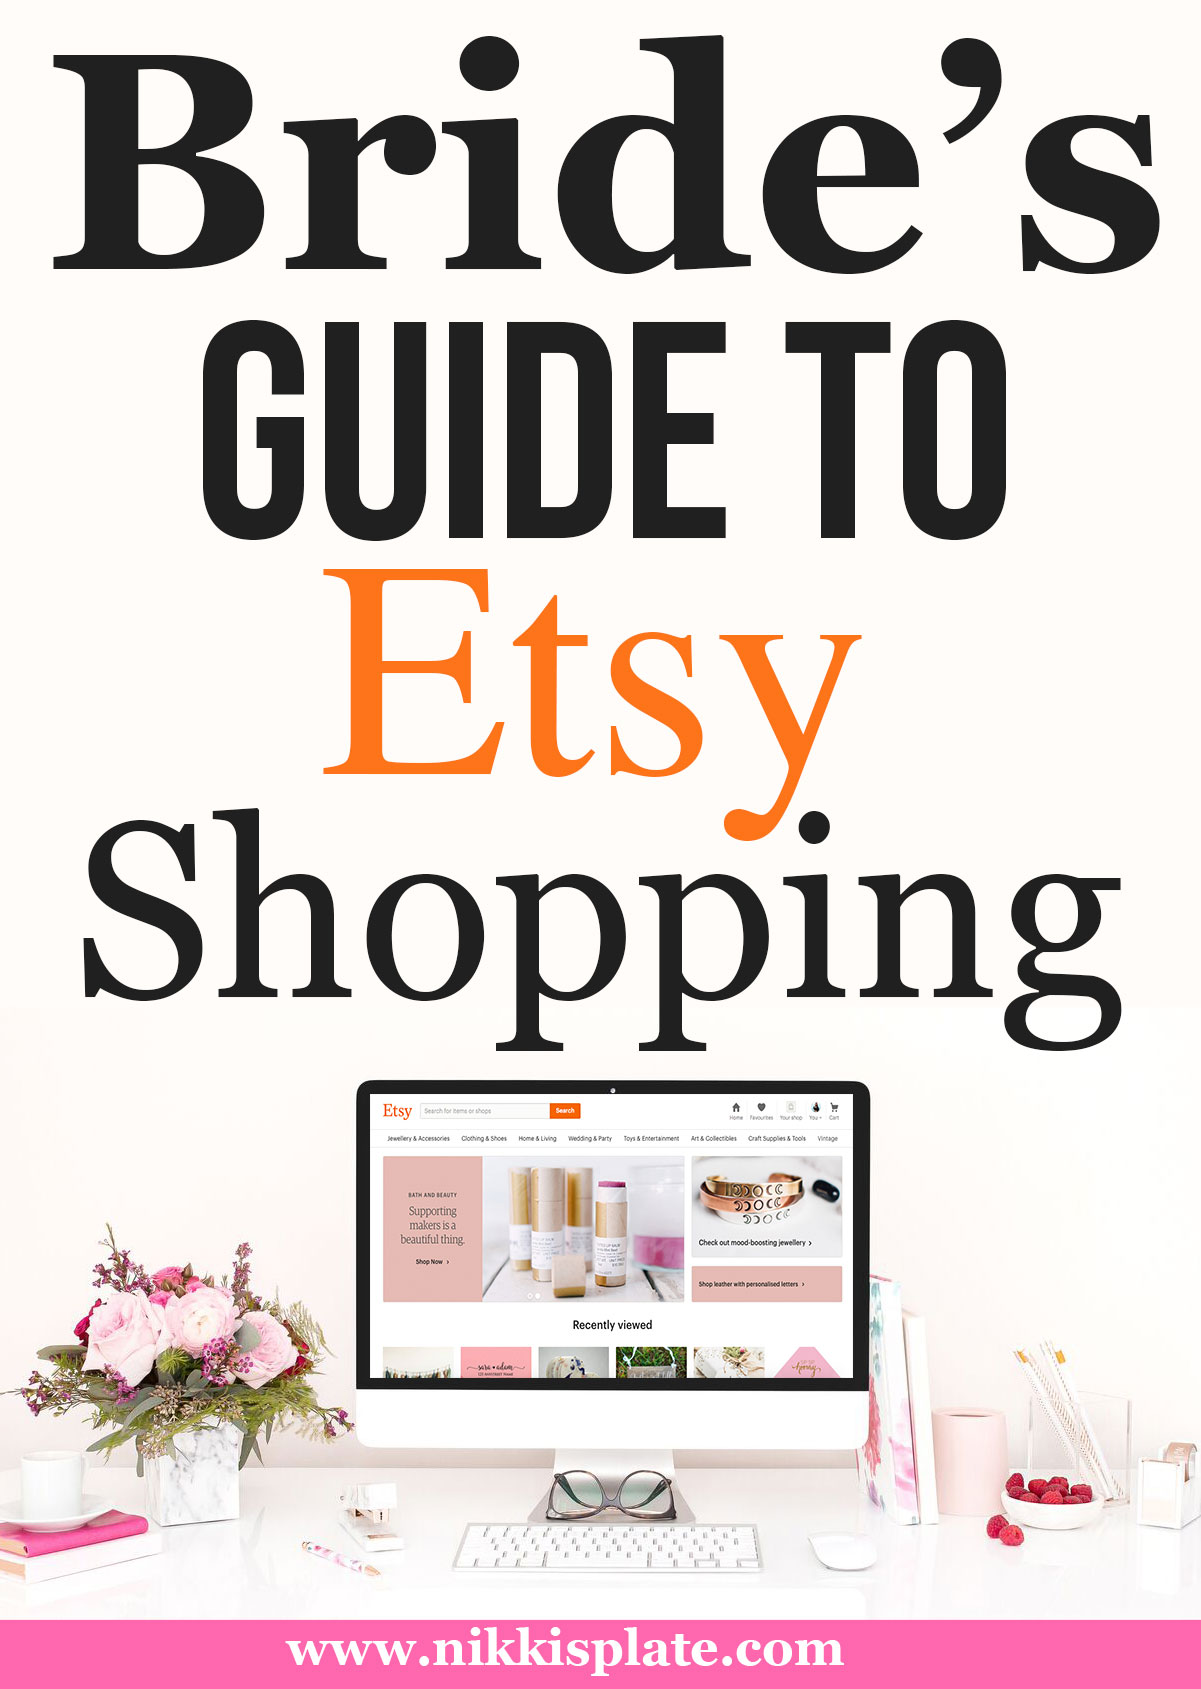 Bride's Guide to Etsy Shopping || Wedding shopping online - decorations & gifts || Nikki's Plate